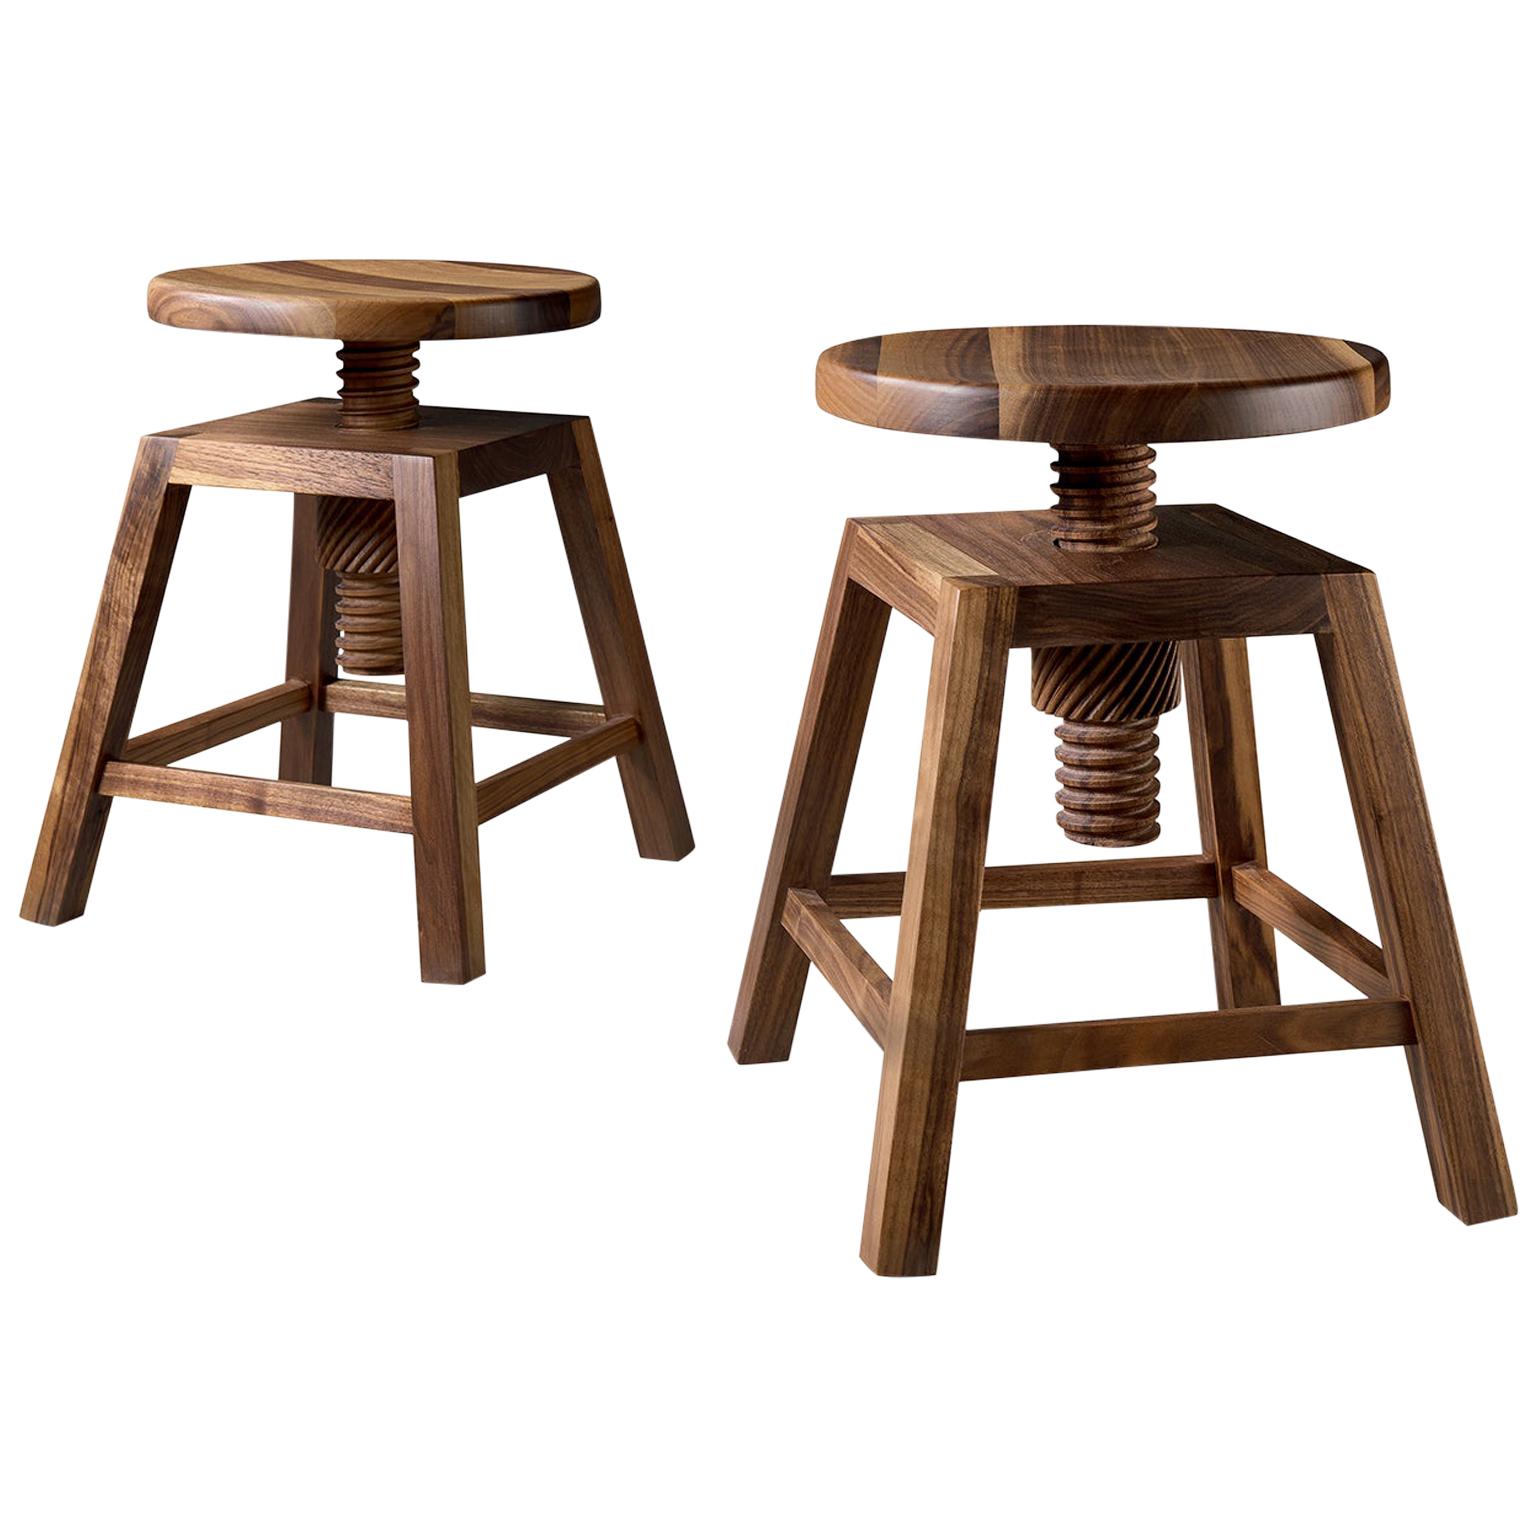 Invito Solid Wood Stool, Walnut in Hand-Made Natural Finish, Contemporary For Sale